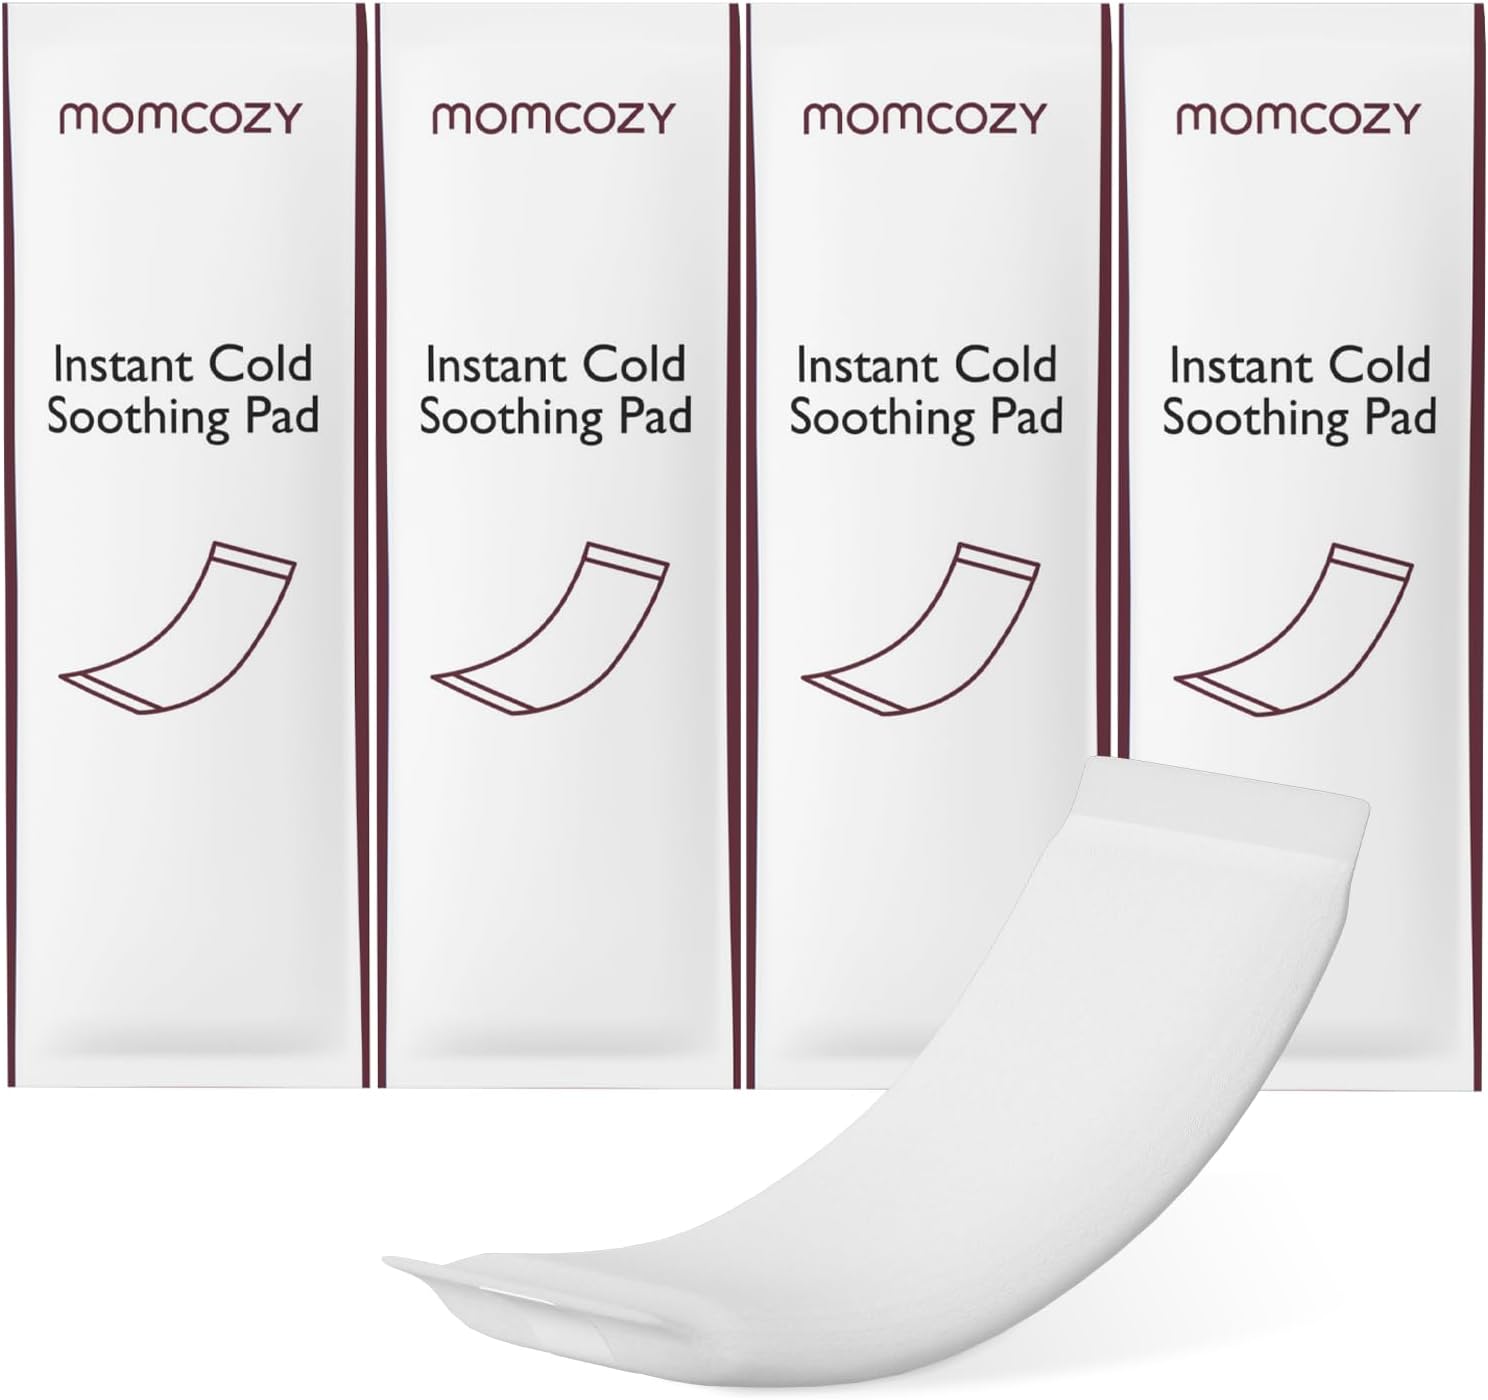 Momcozy 2-in-1 Postpartum Recovery Care Instant Cold Soothing Ice Pads, 4-Pack Super Absorbent Maternity Cooling Pads for Women Moms Labor Delivery Care Mothers After Birth